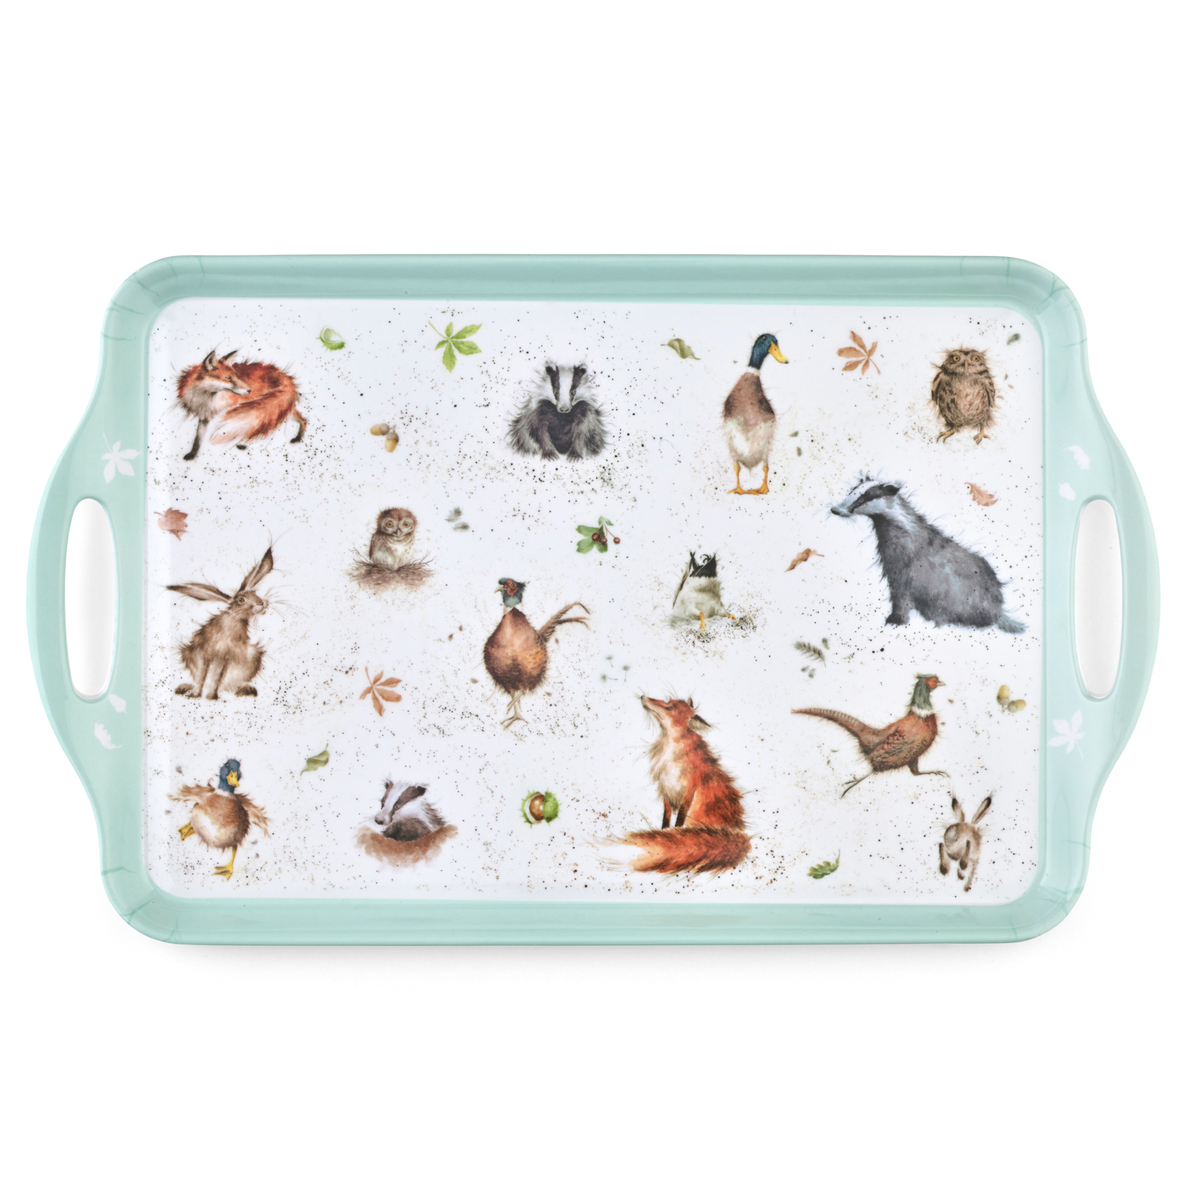 Wrendale Designs Large Tray image number null